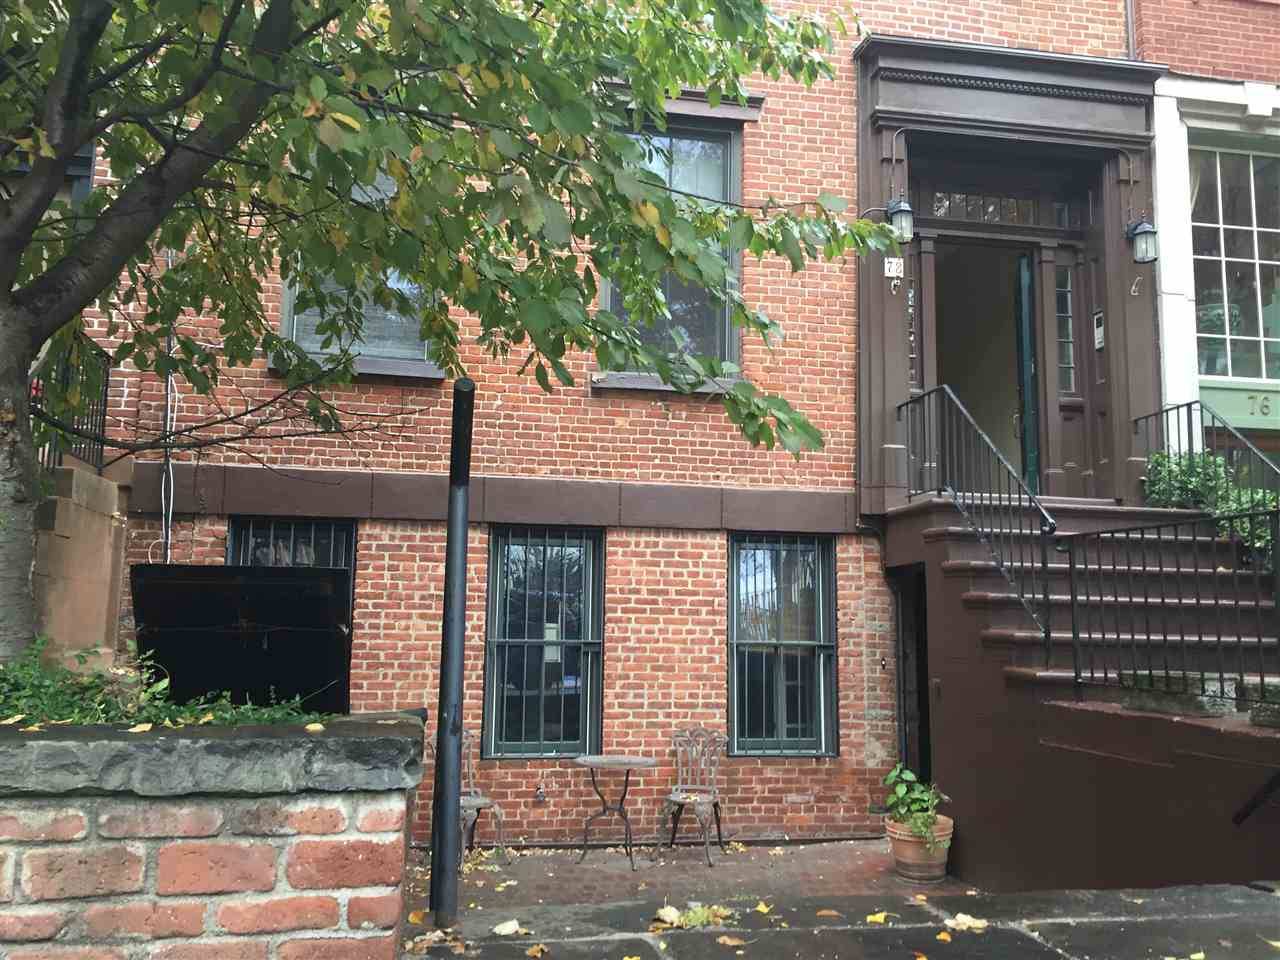 Welcome to this Paulus Hook row house with exclusive front yard & a private entry door